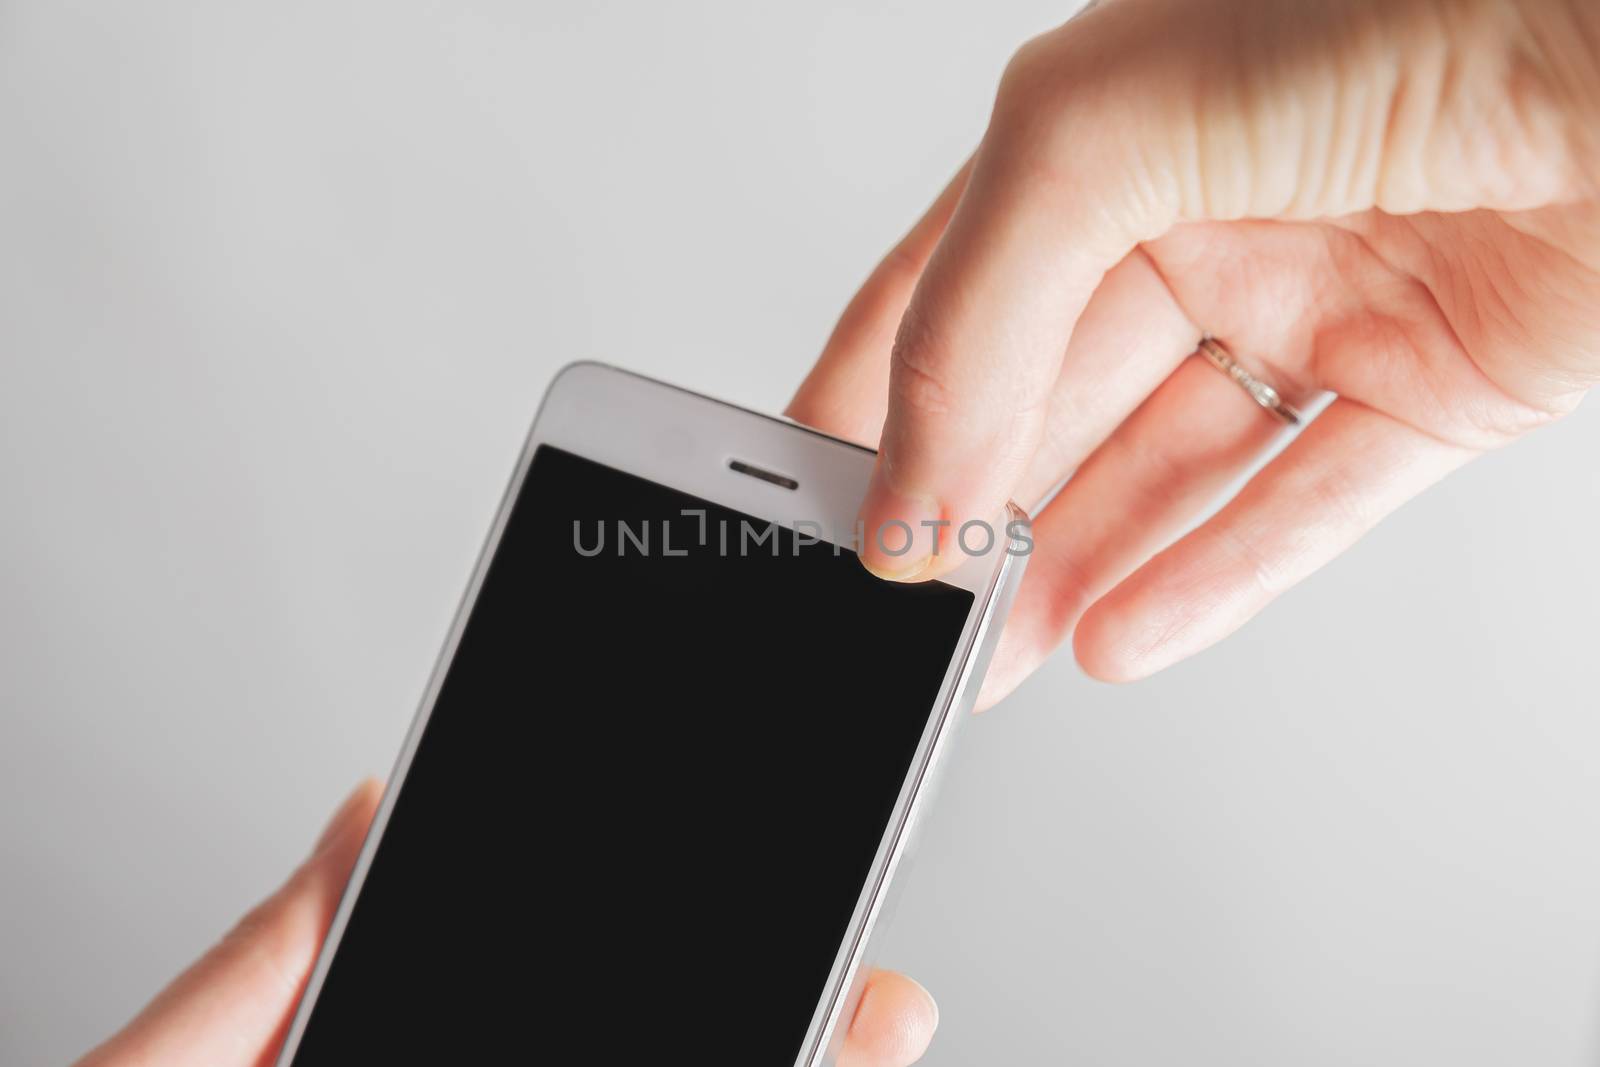 Thumb covers up the front facing camera of a smartphone. Concept of privacy, online security of a firewall